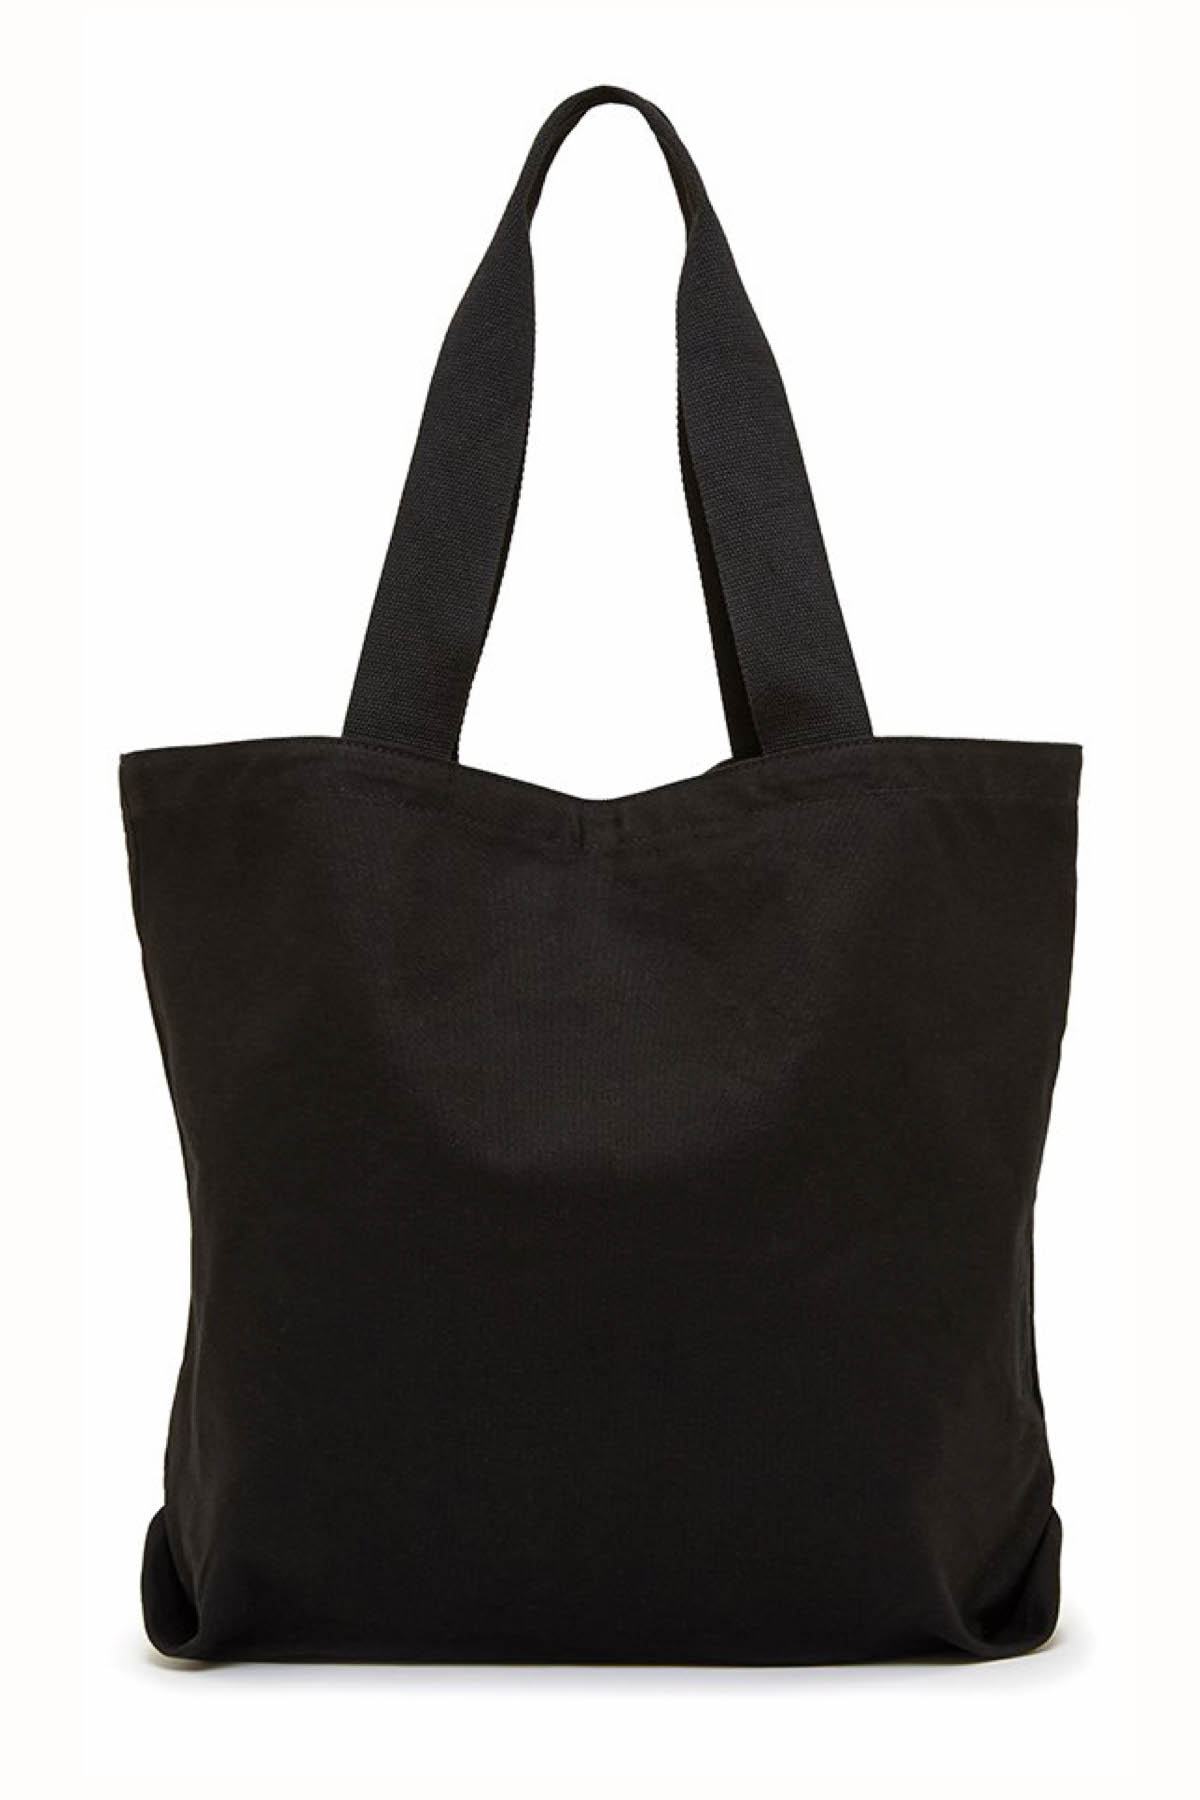 Ban.do Black Very Busy Canvas Tote